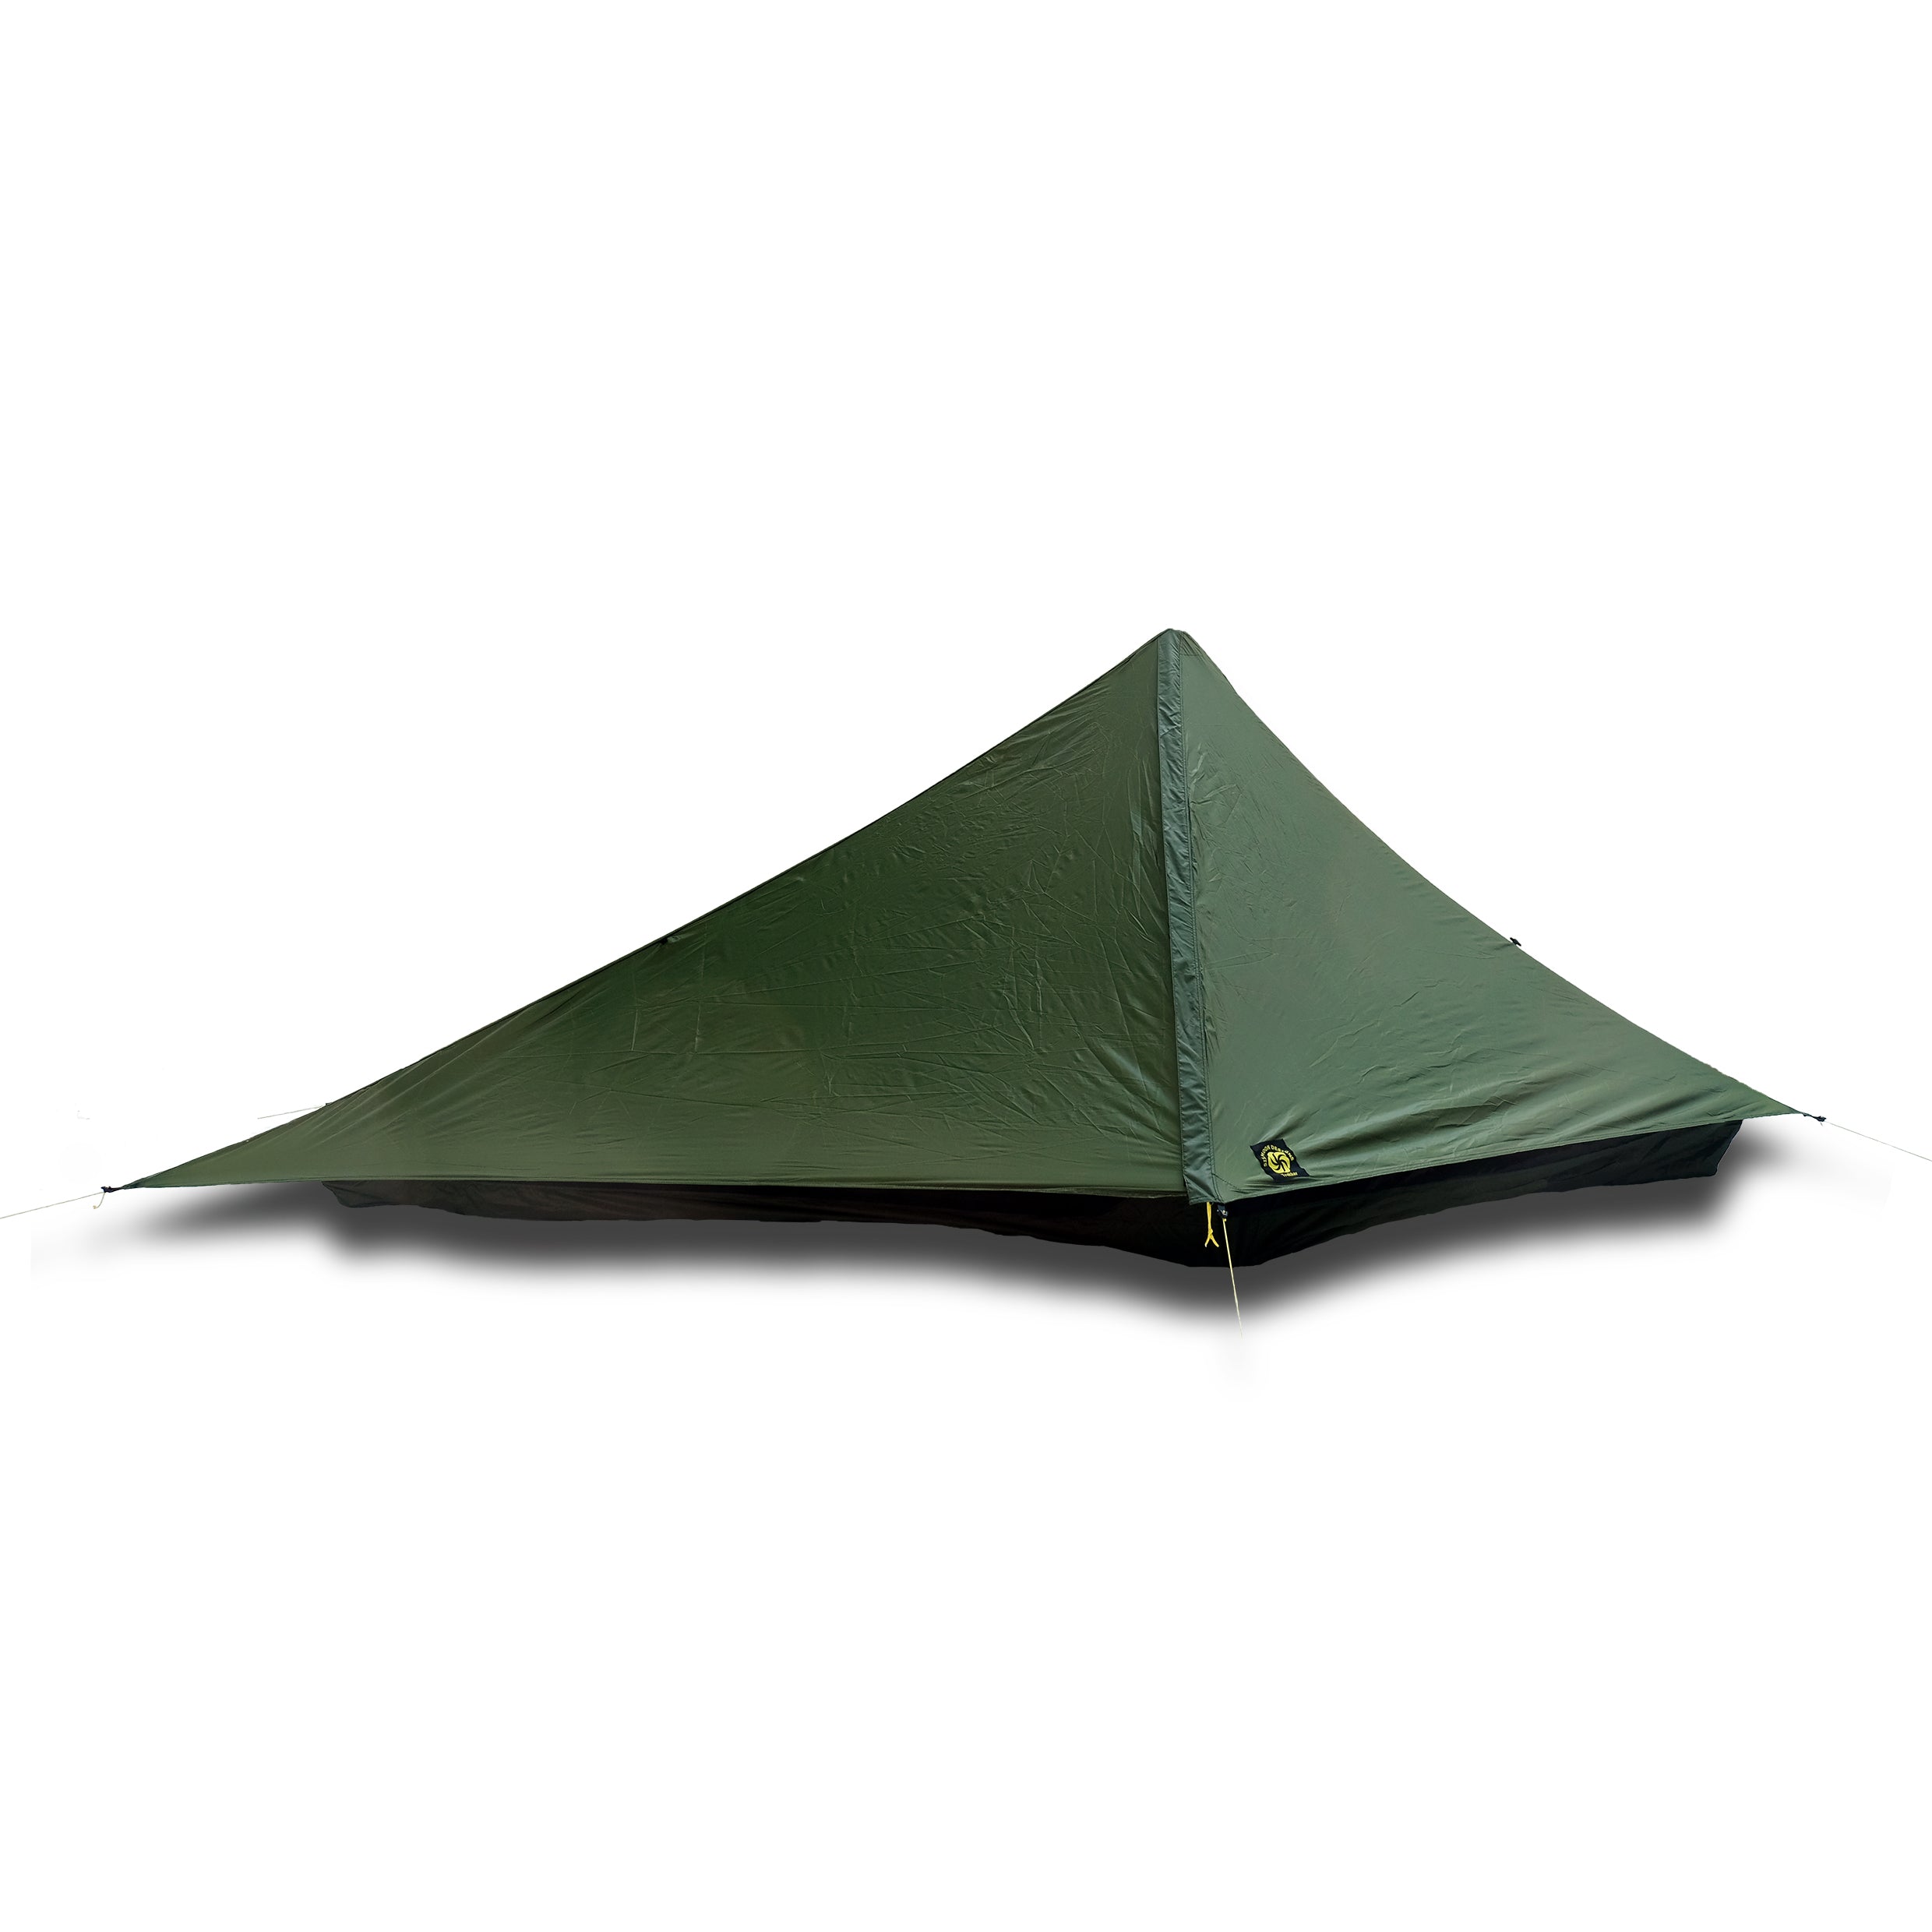 Skyscape Trekker One Person Hiking Tent - Six Moon Designs